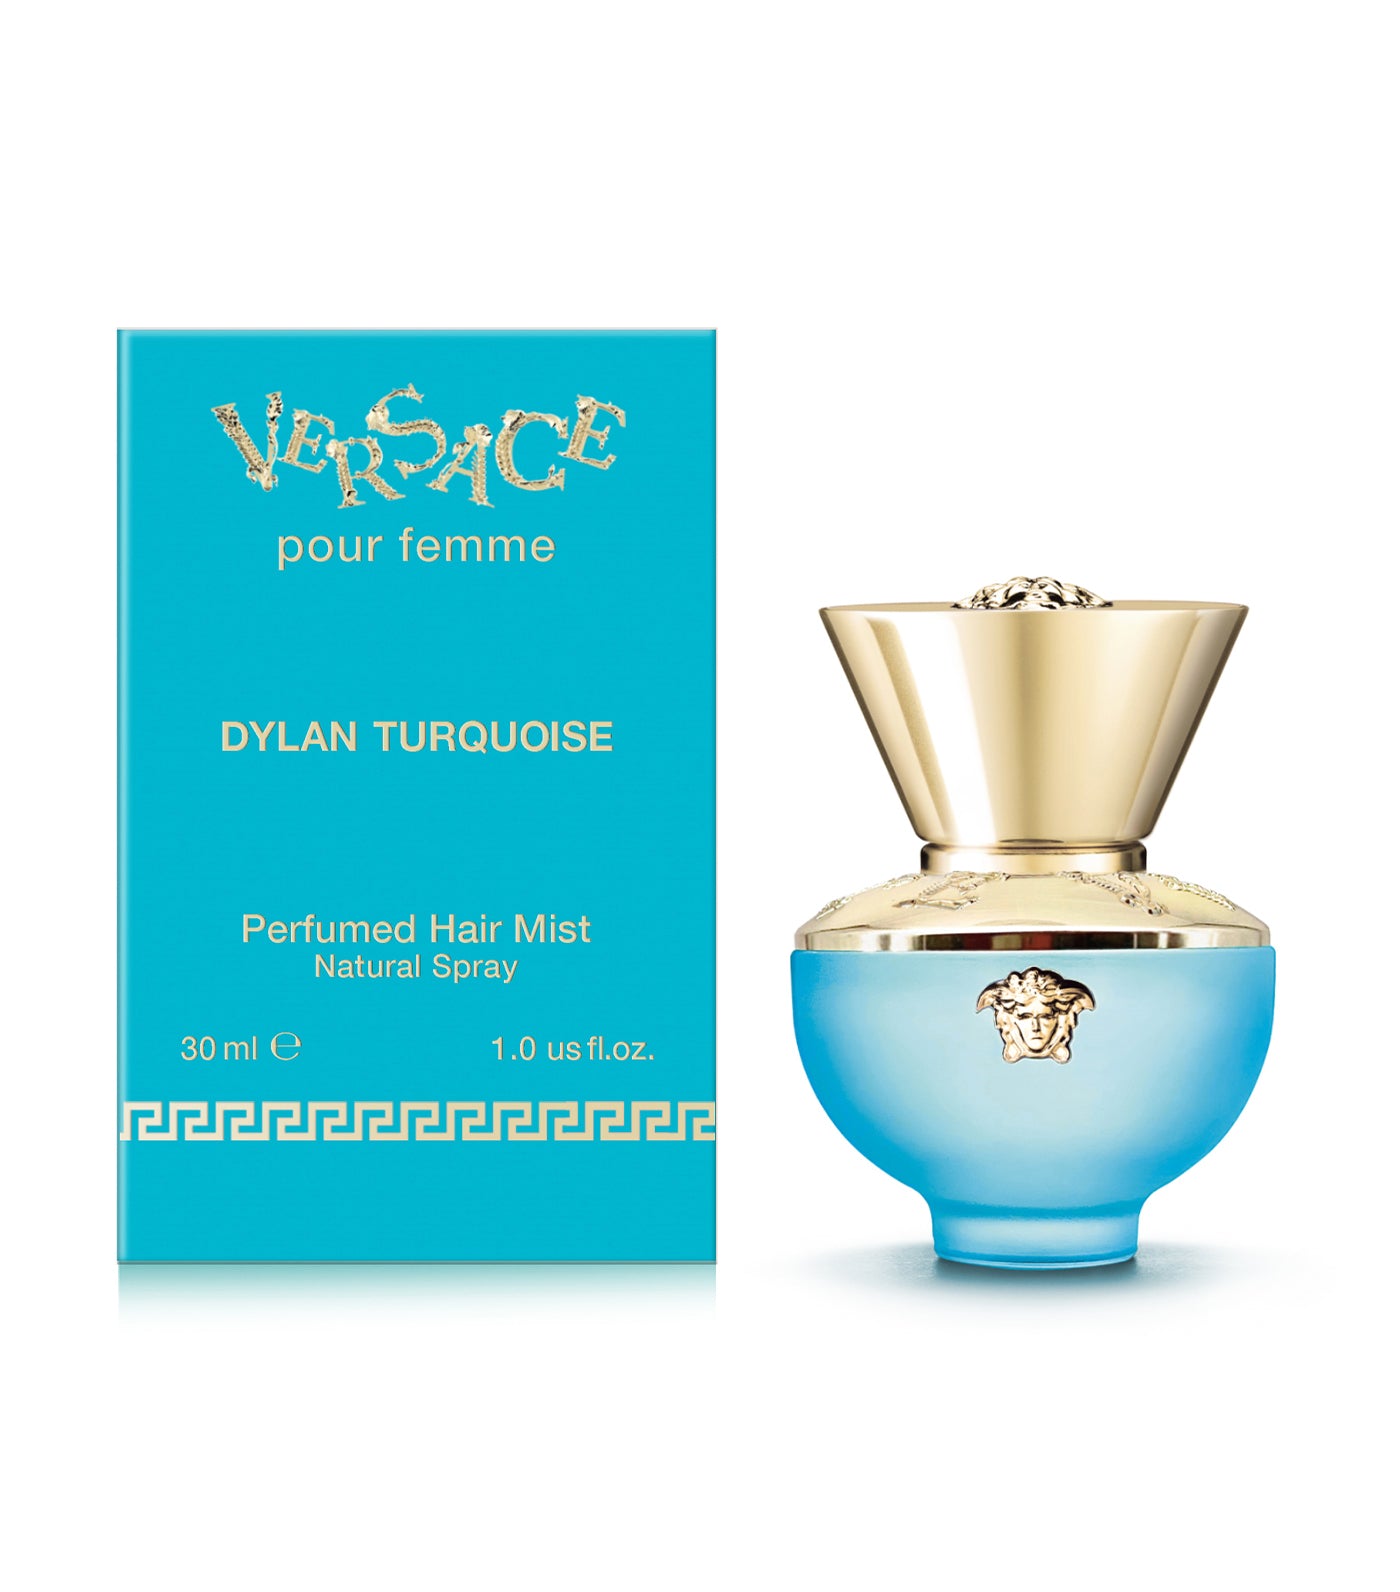 VERSACE Dylan Turquoise Hair Mist